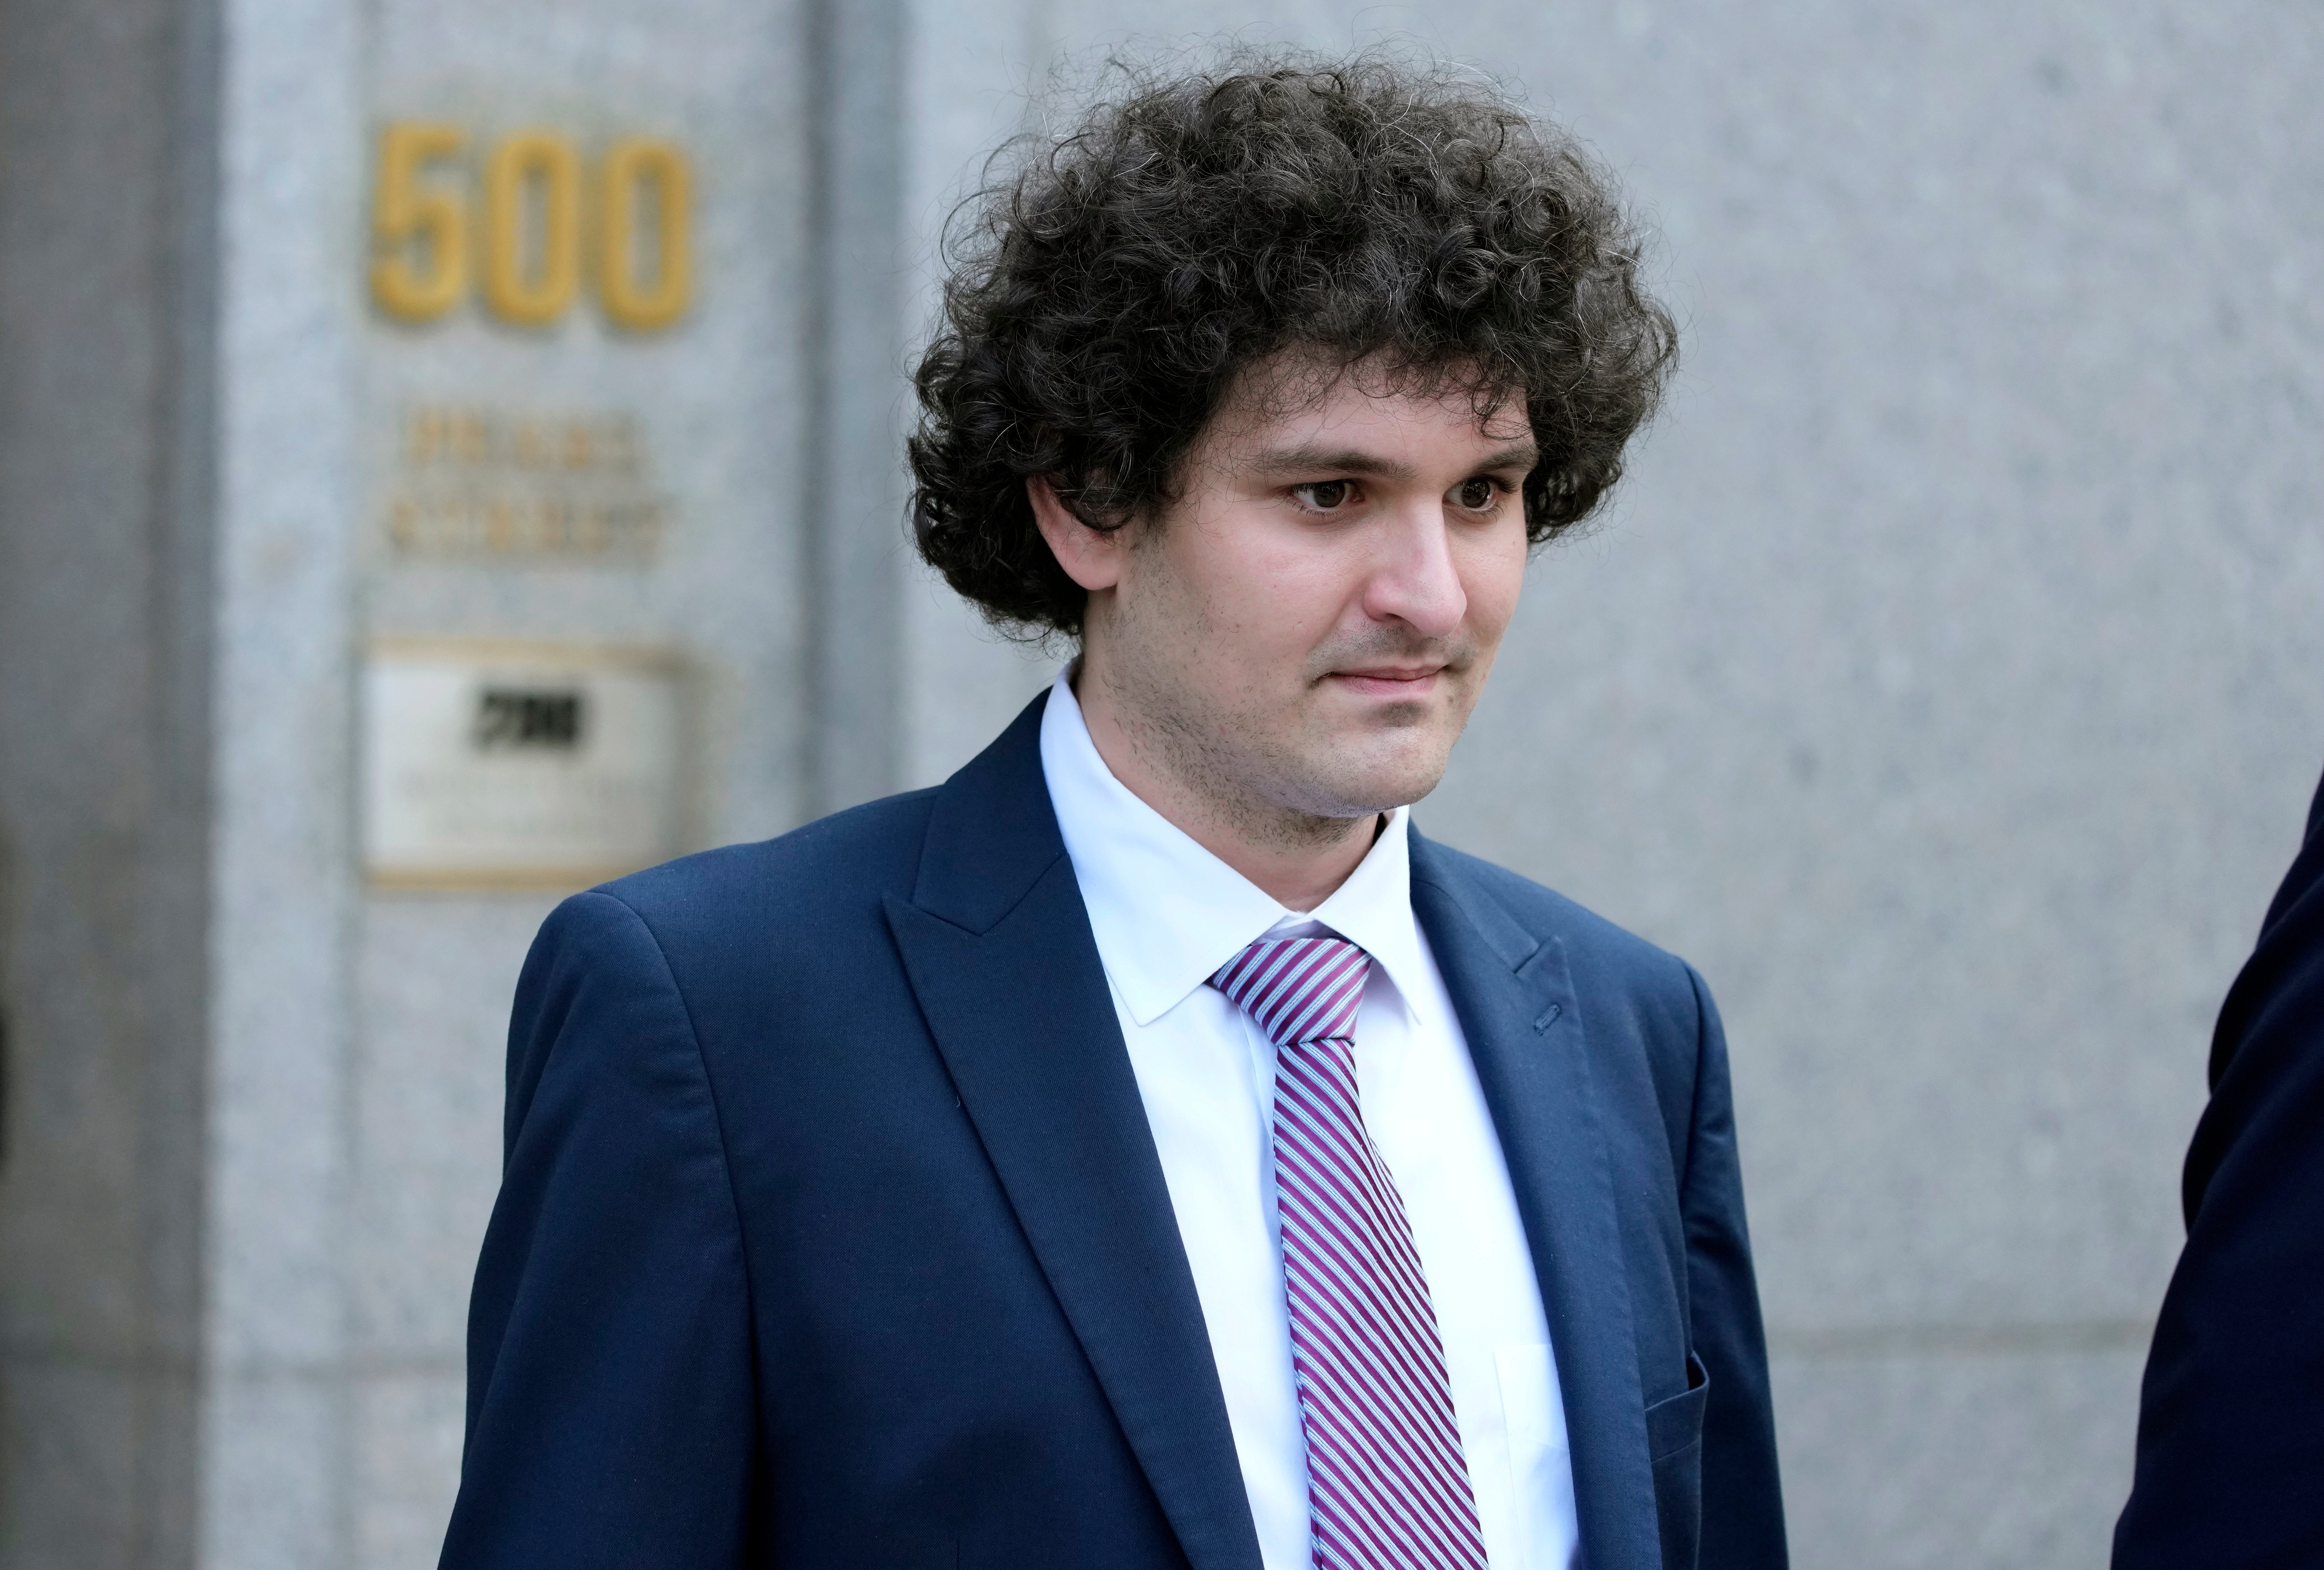 FTX founder Sam Bankman-Fried was sentenced to 25 years in March after being found guilty of two counts of fraud and five counts of conspiracy